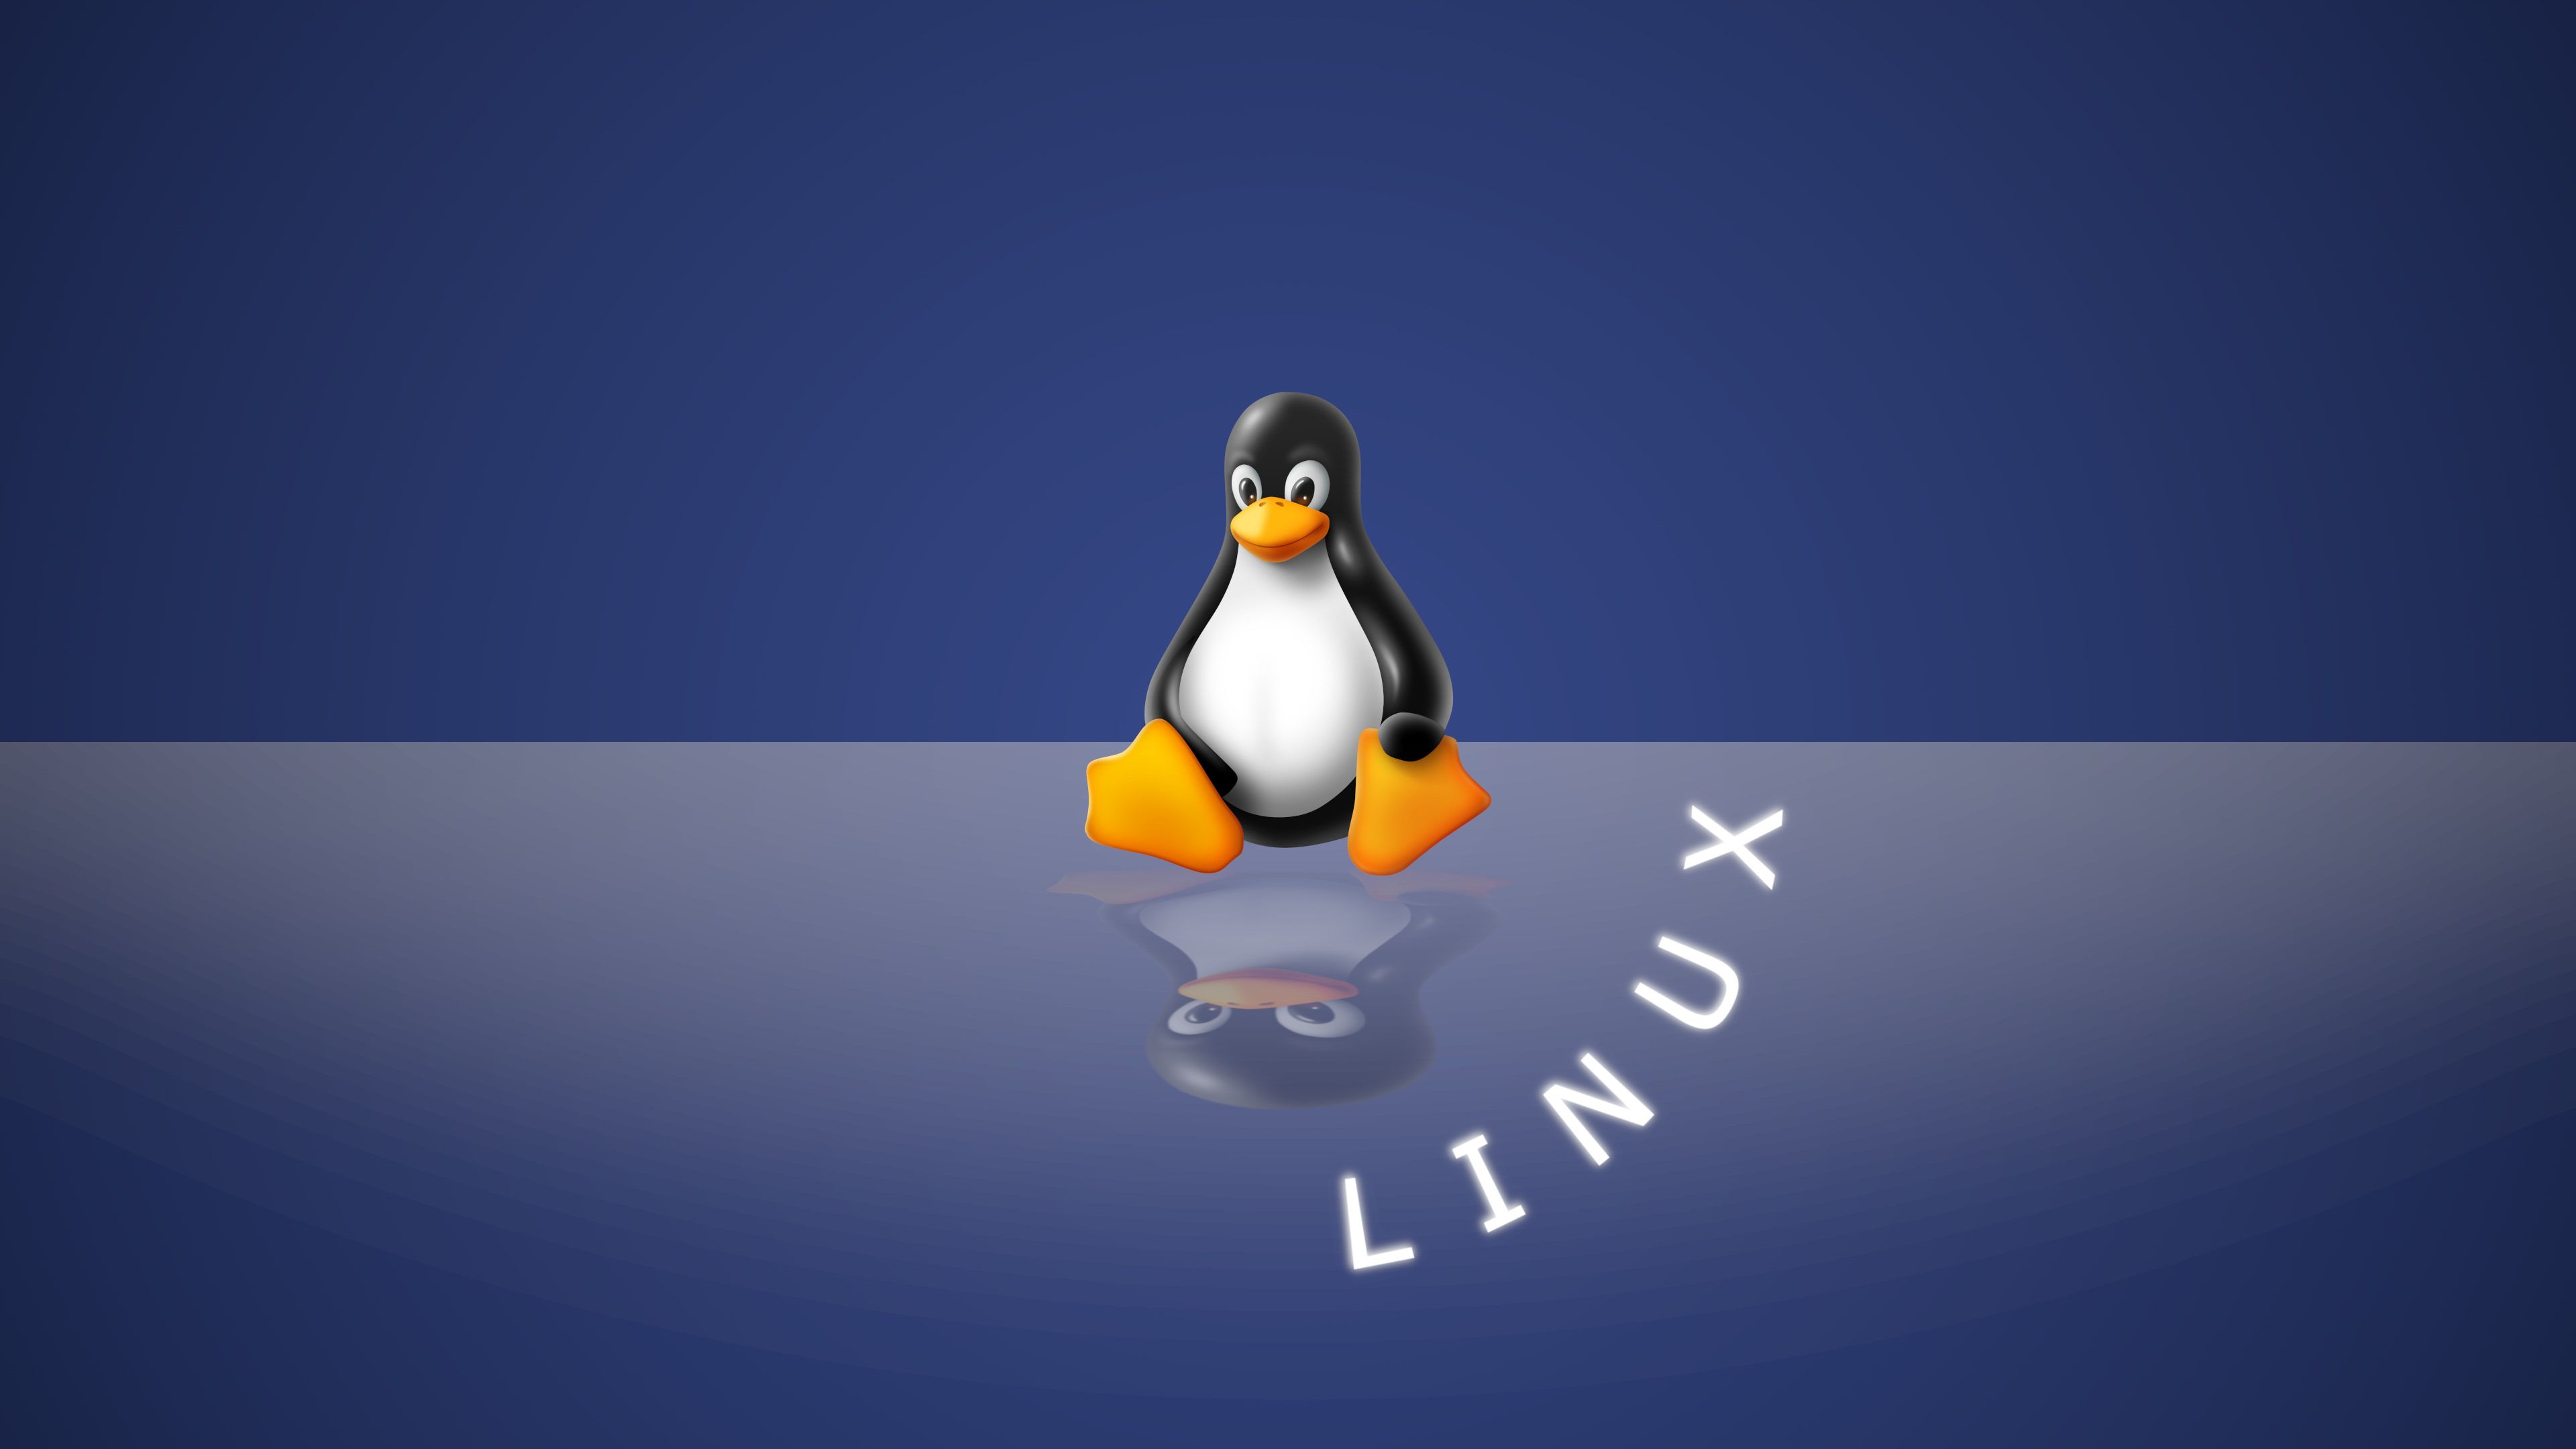 Linux Glossy